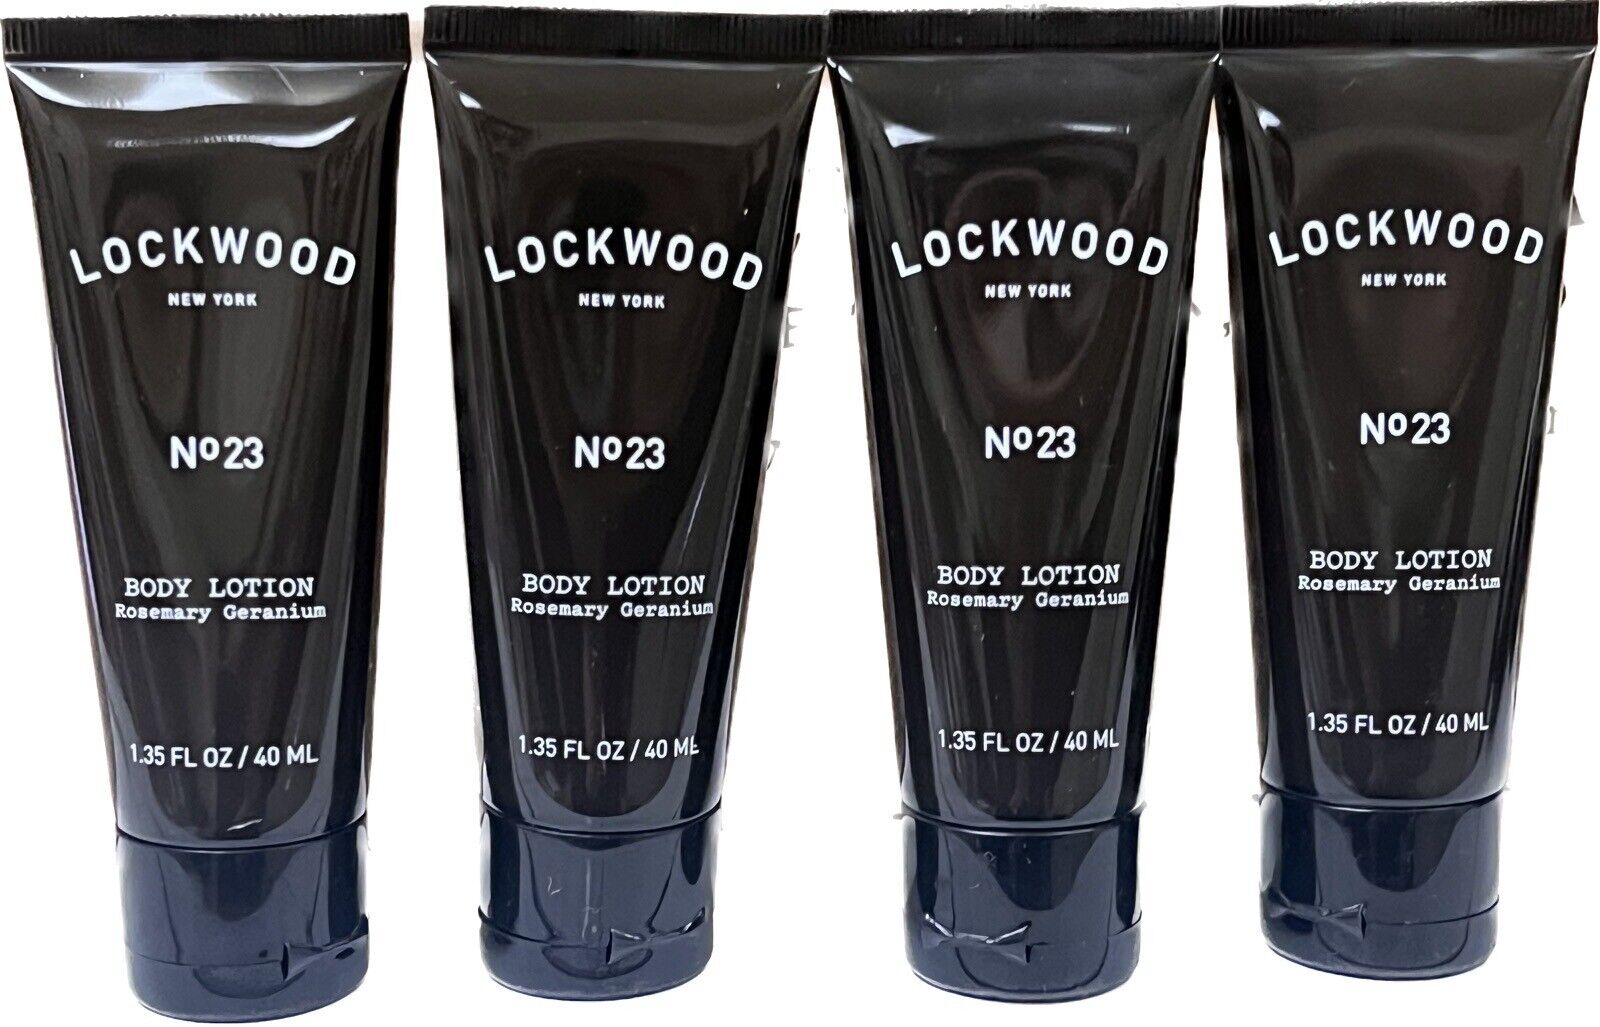 (4) Lockwood New York By Gilchrist & Soames Nº23 Body Lotion